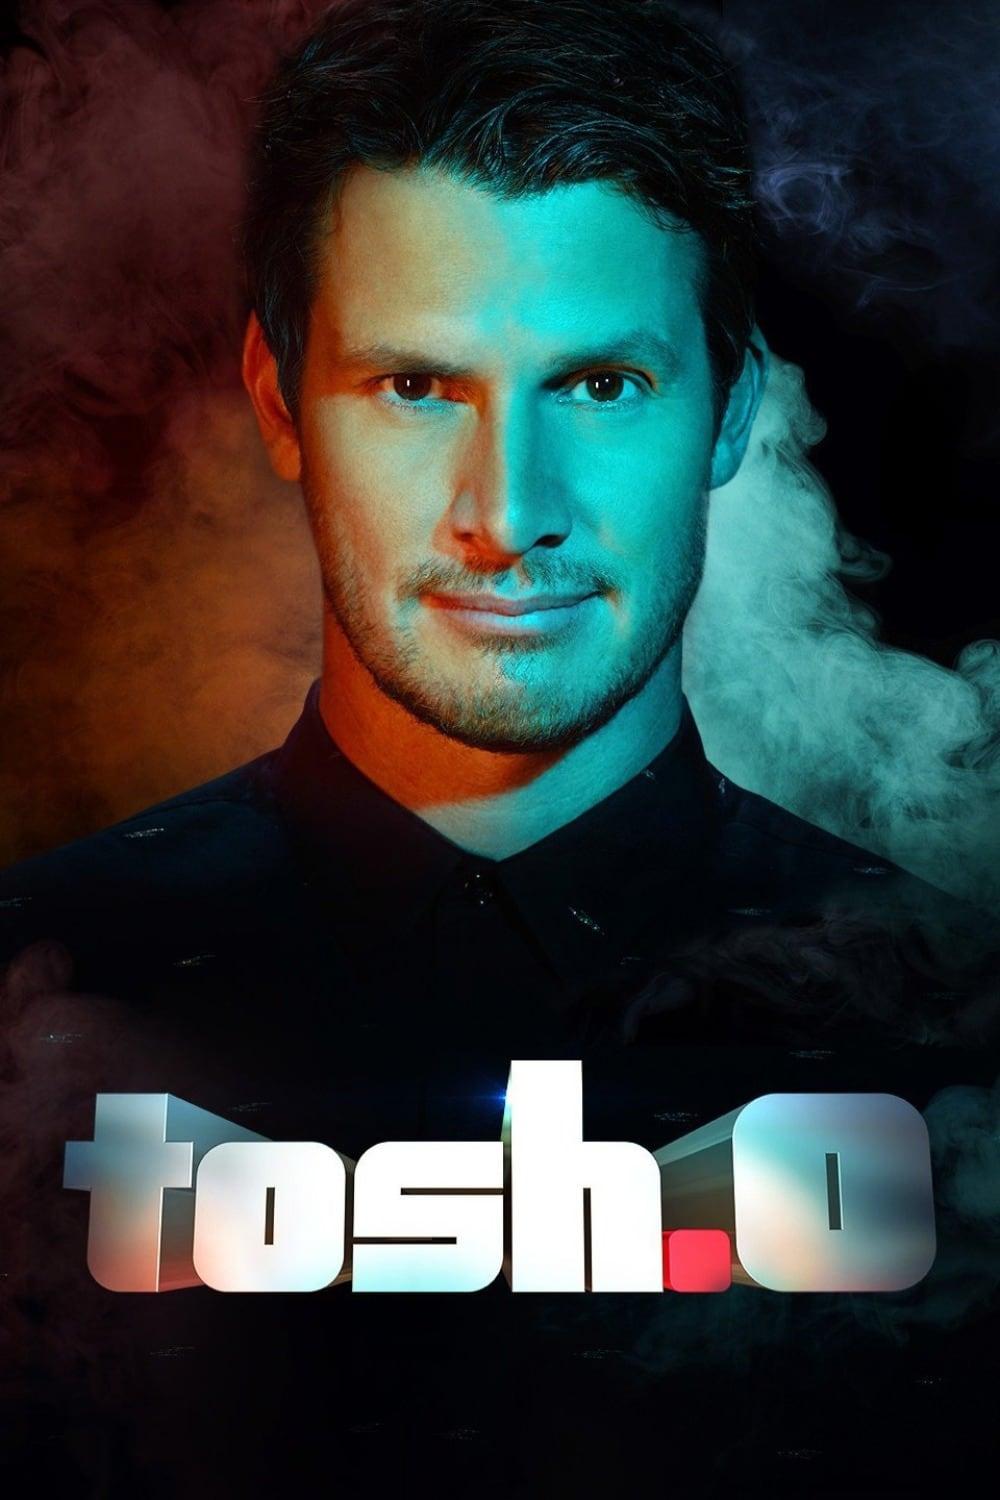 Tosh.0 poster